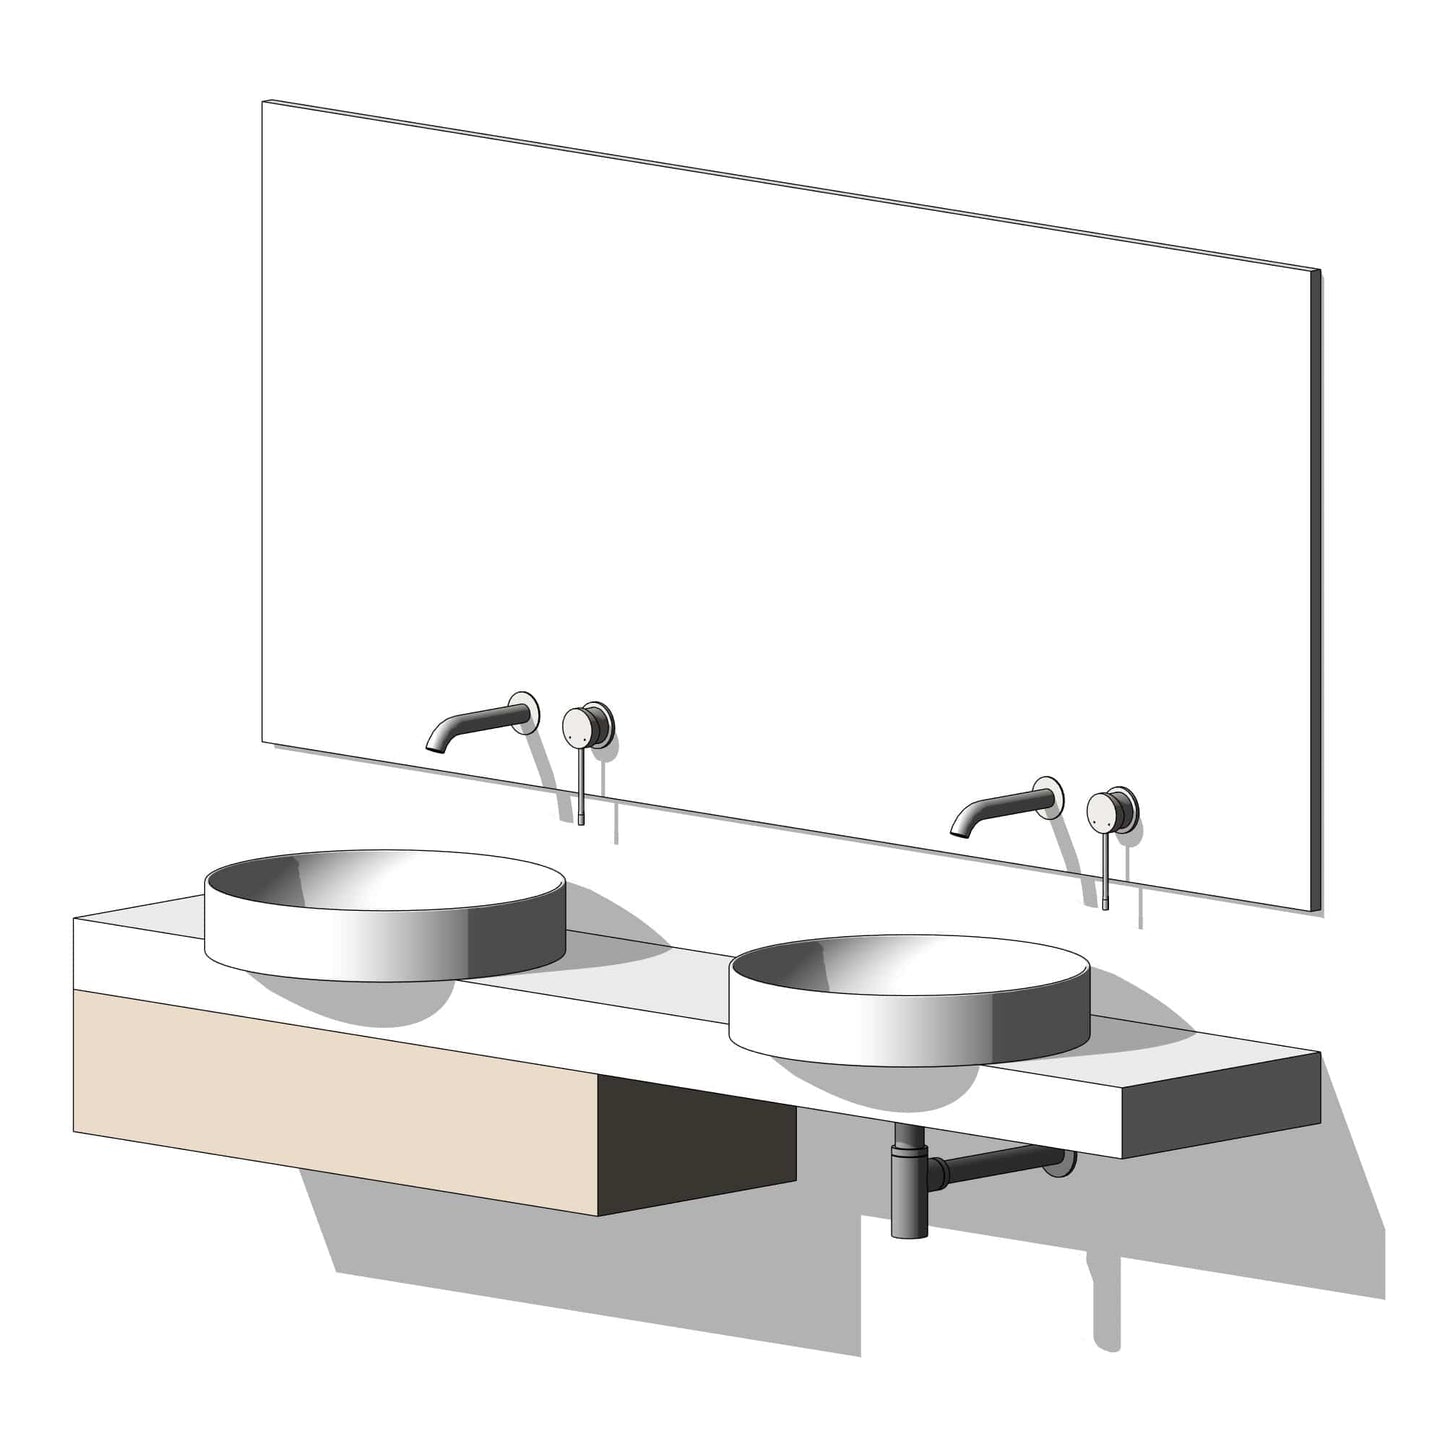 BIMcraftHQ-Joinery-Vanity and Basin Set